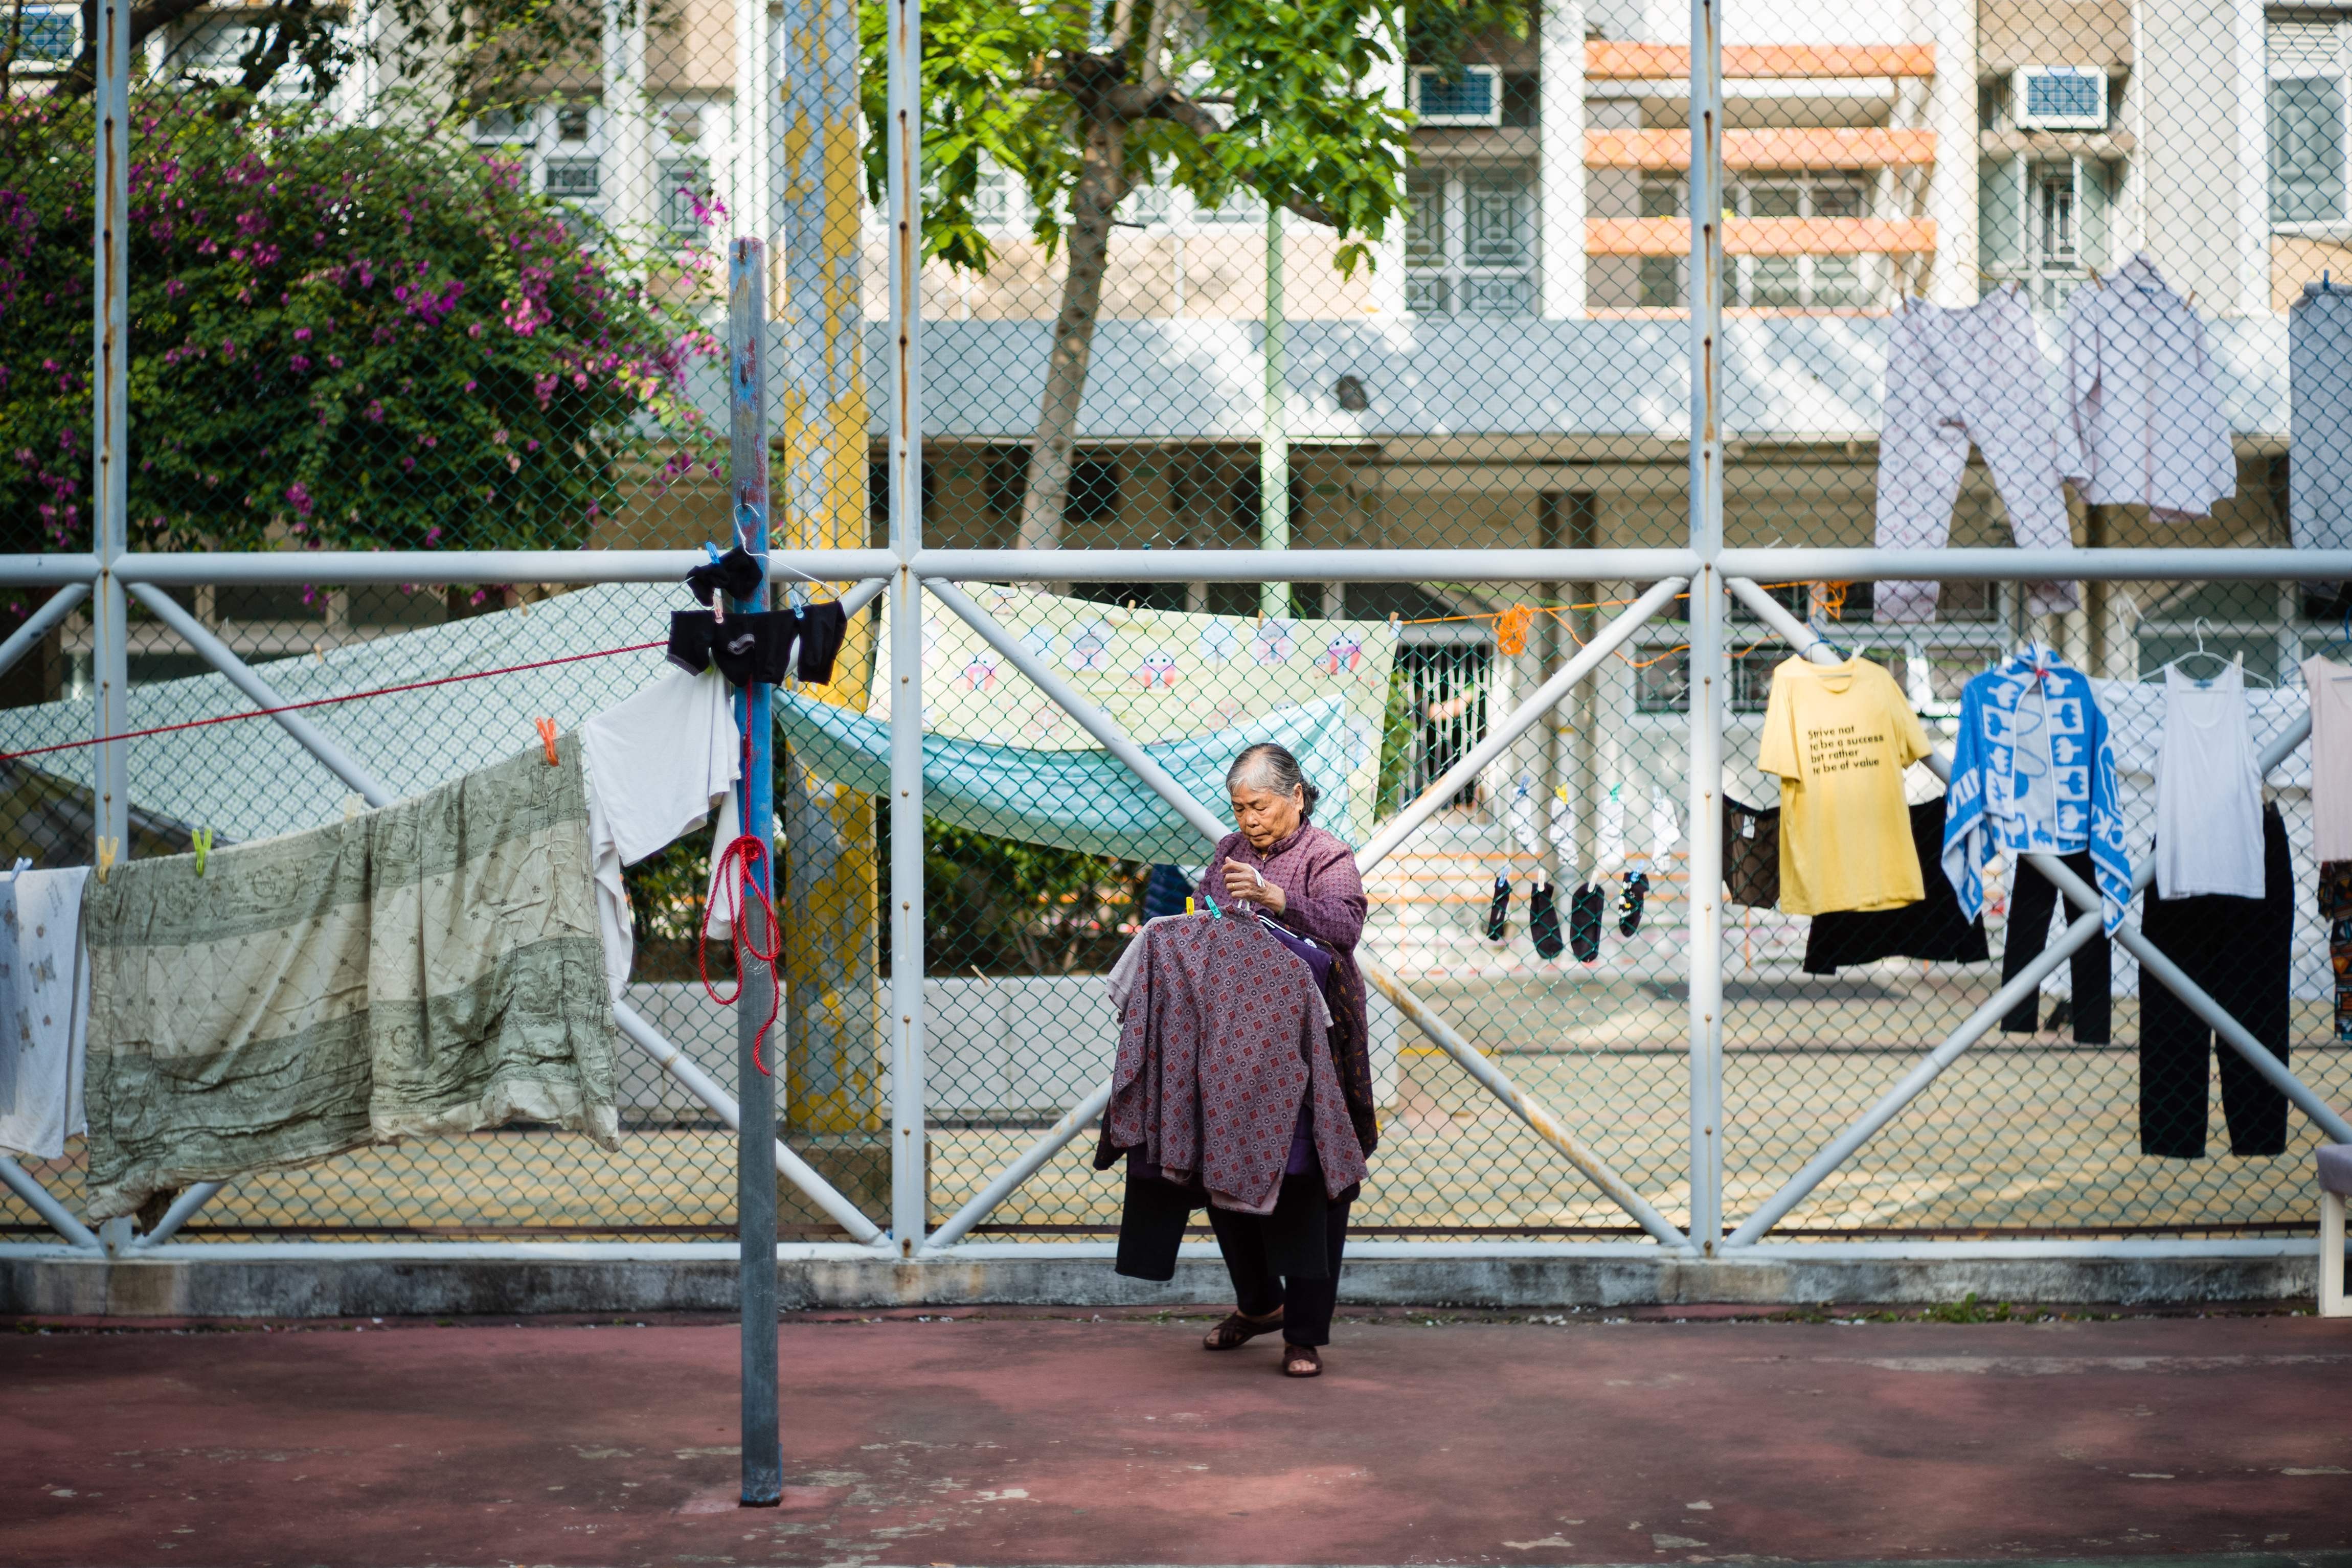 About 20 per cent of Hong Kong’s population are living below the poverty line, according to official figures released last November. The proportion of those considered destitute is even higher among the elderly. Photo: AFP